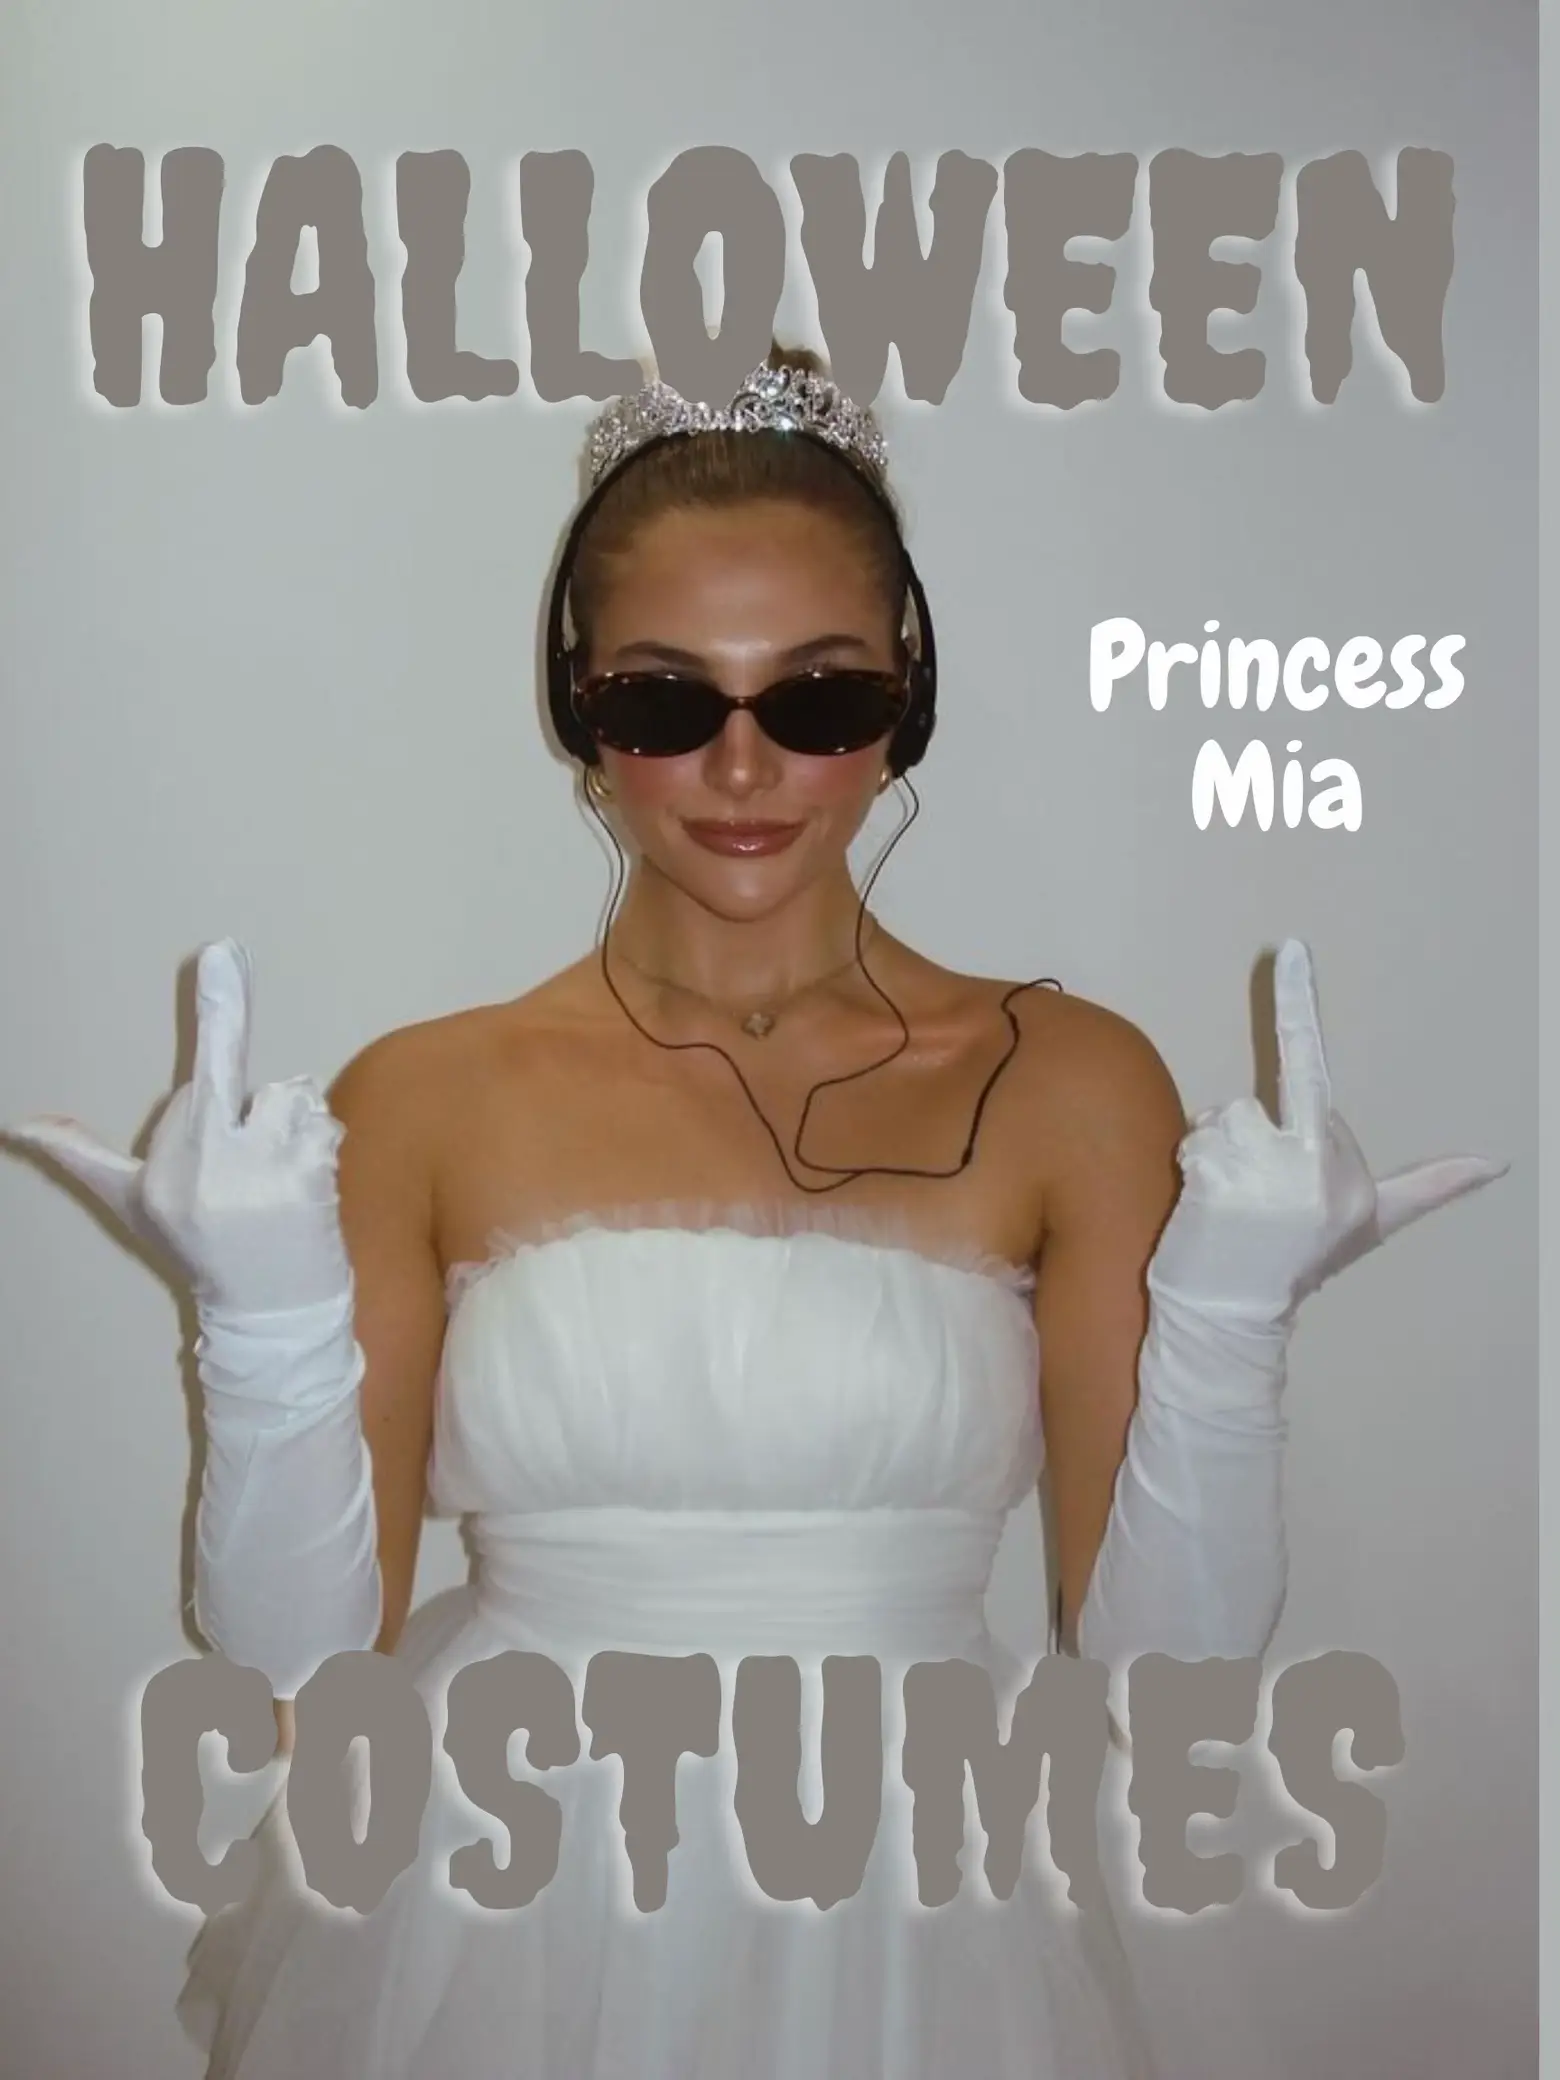 Summer Coconut Bra Halloween Costume Outfit T-Shirt copy - Inspire Uplift